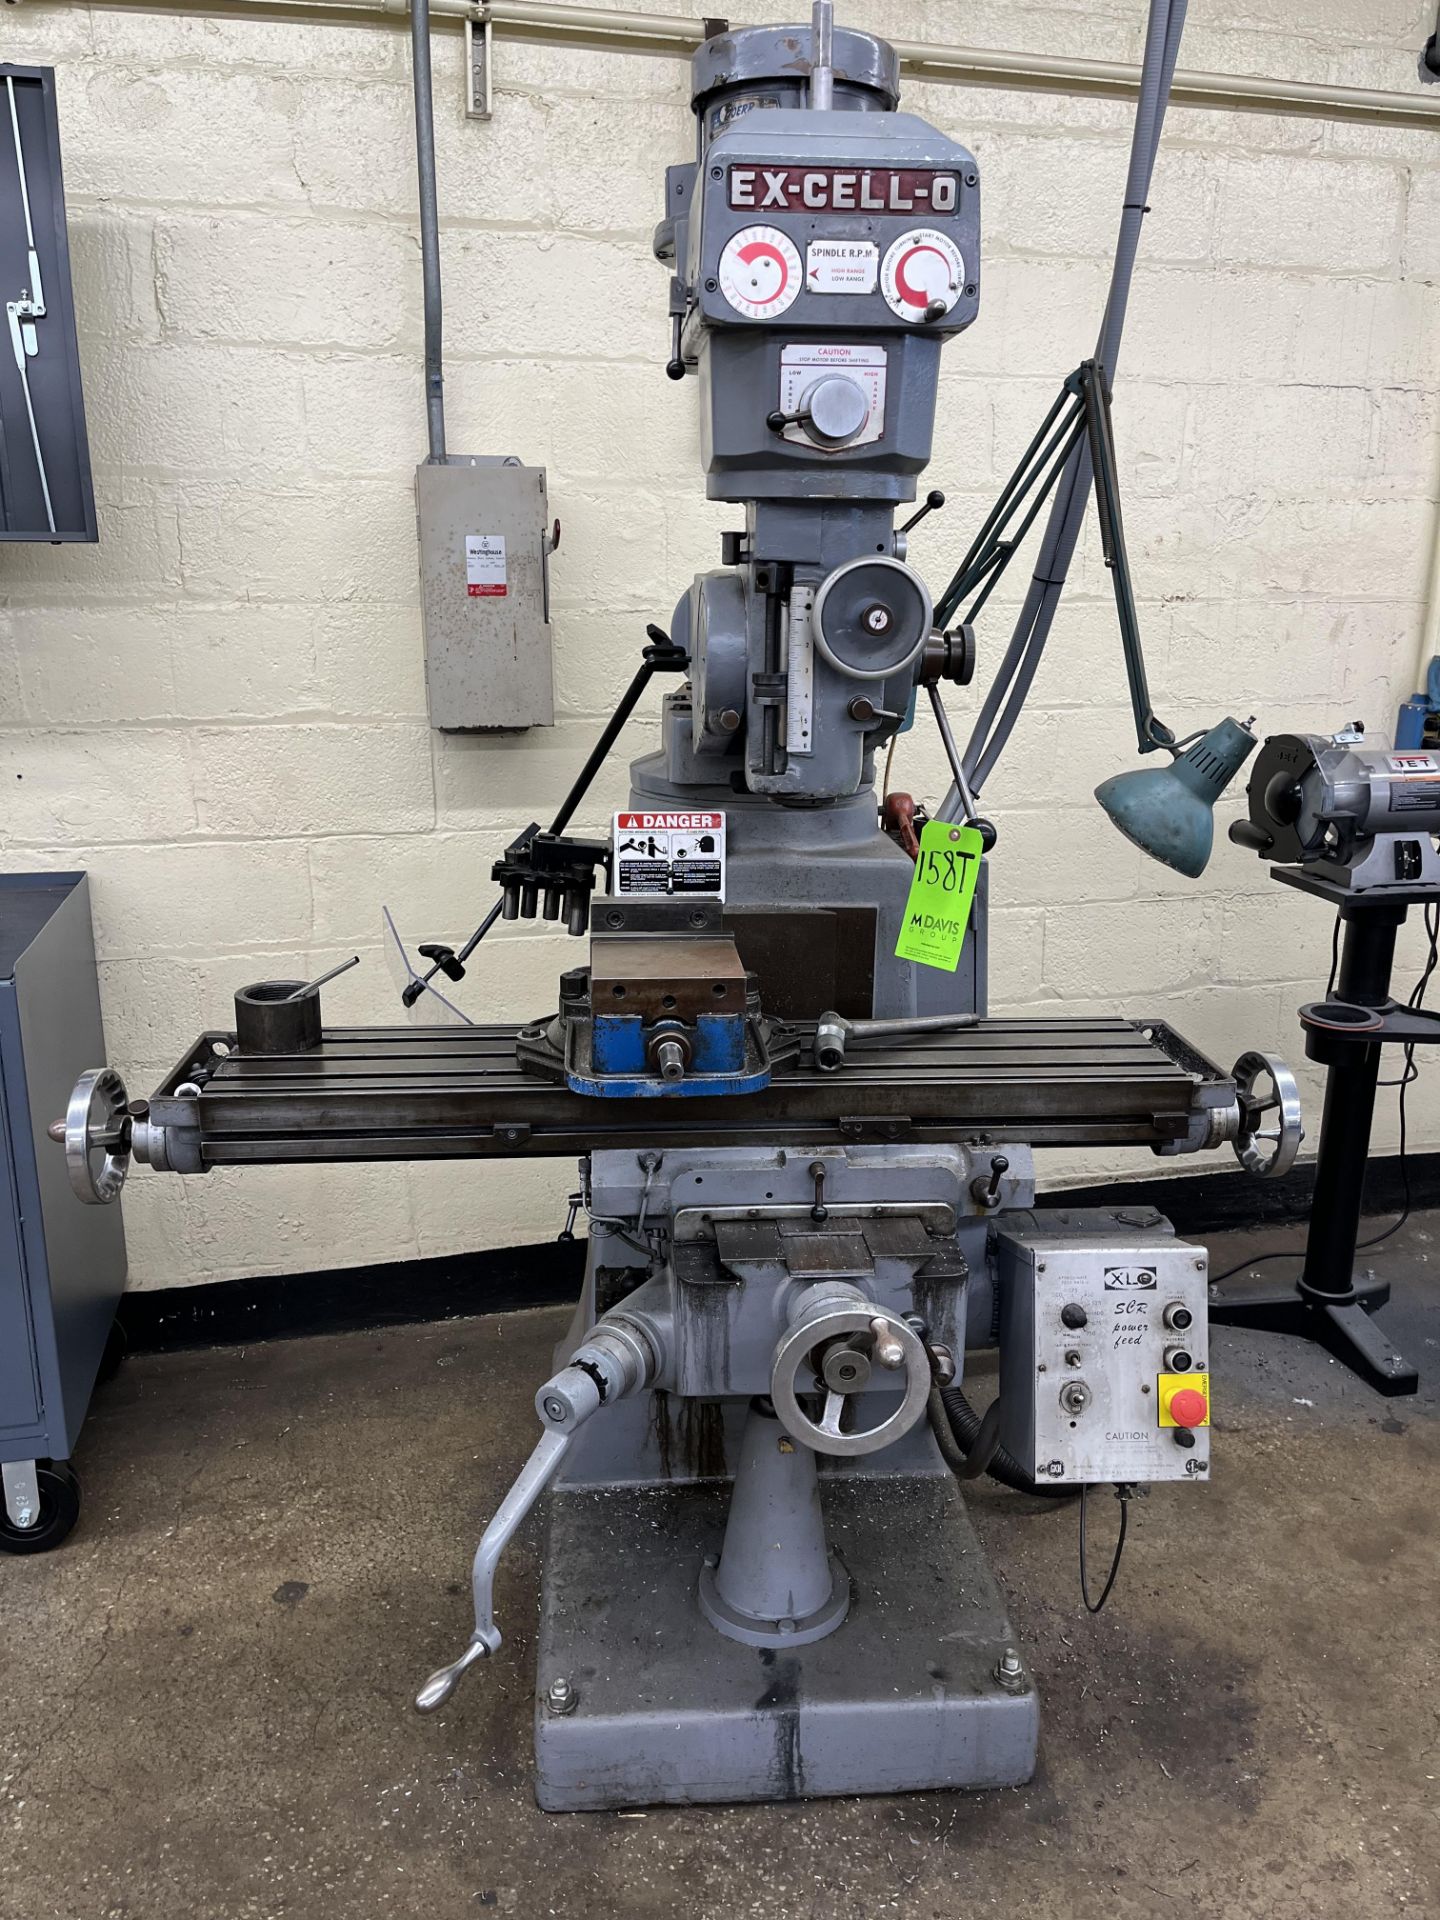 EX-CELL-O CORPORATION RAM TURRET MILLING MACHINE STYLE 602 SERIAL NO. 6026865 SPINDLE 460 VOLTS 2. - Image 6 of 8